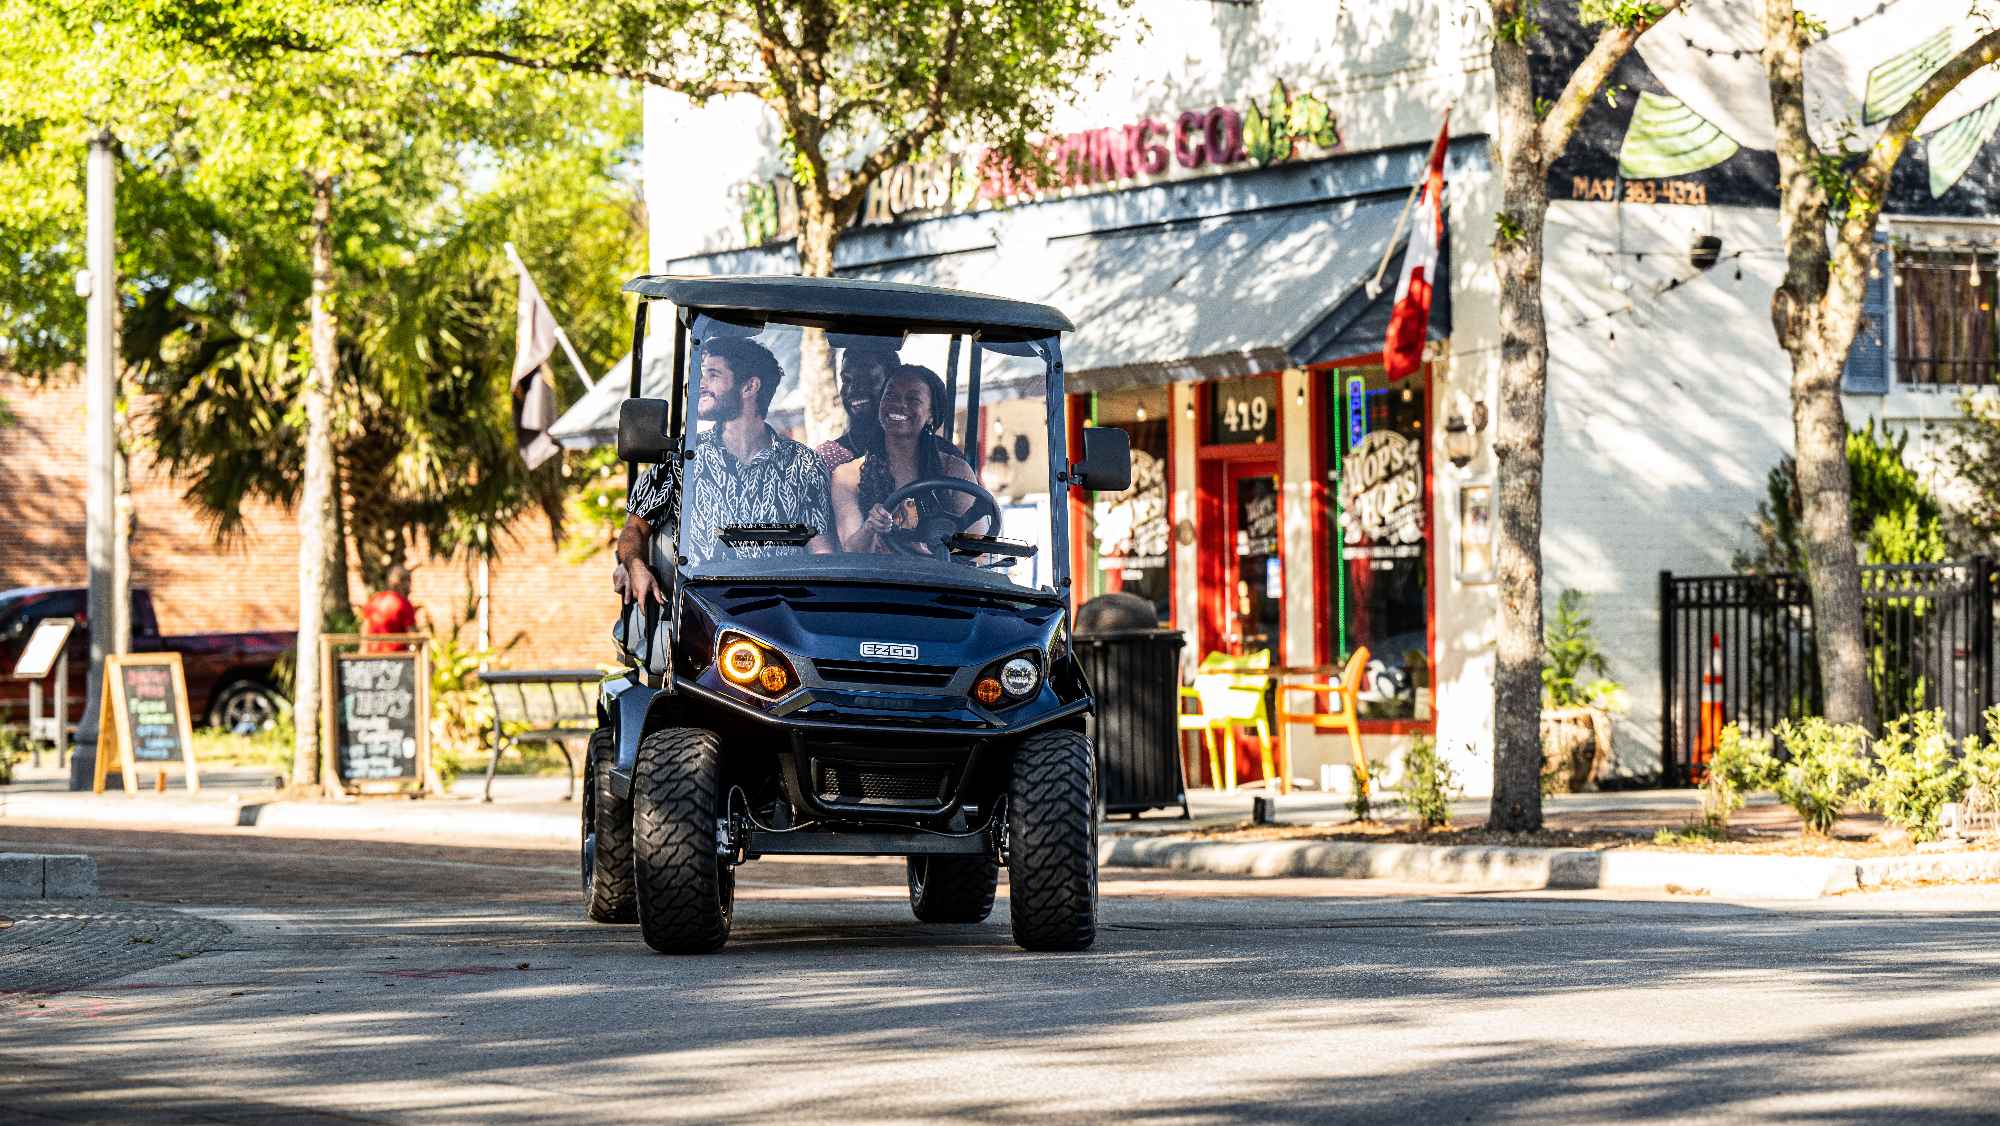 Three friends ride in an E-Z-GO LSV in a downtown shopping center.